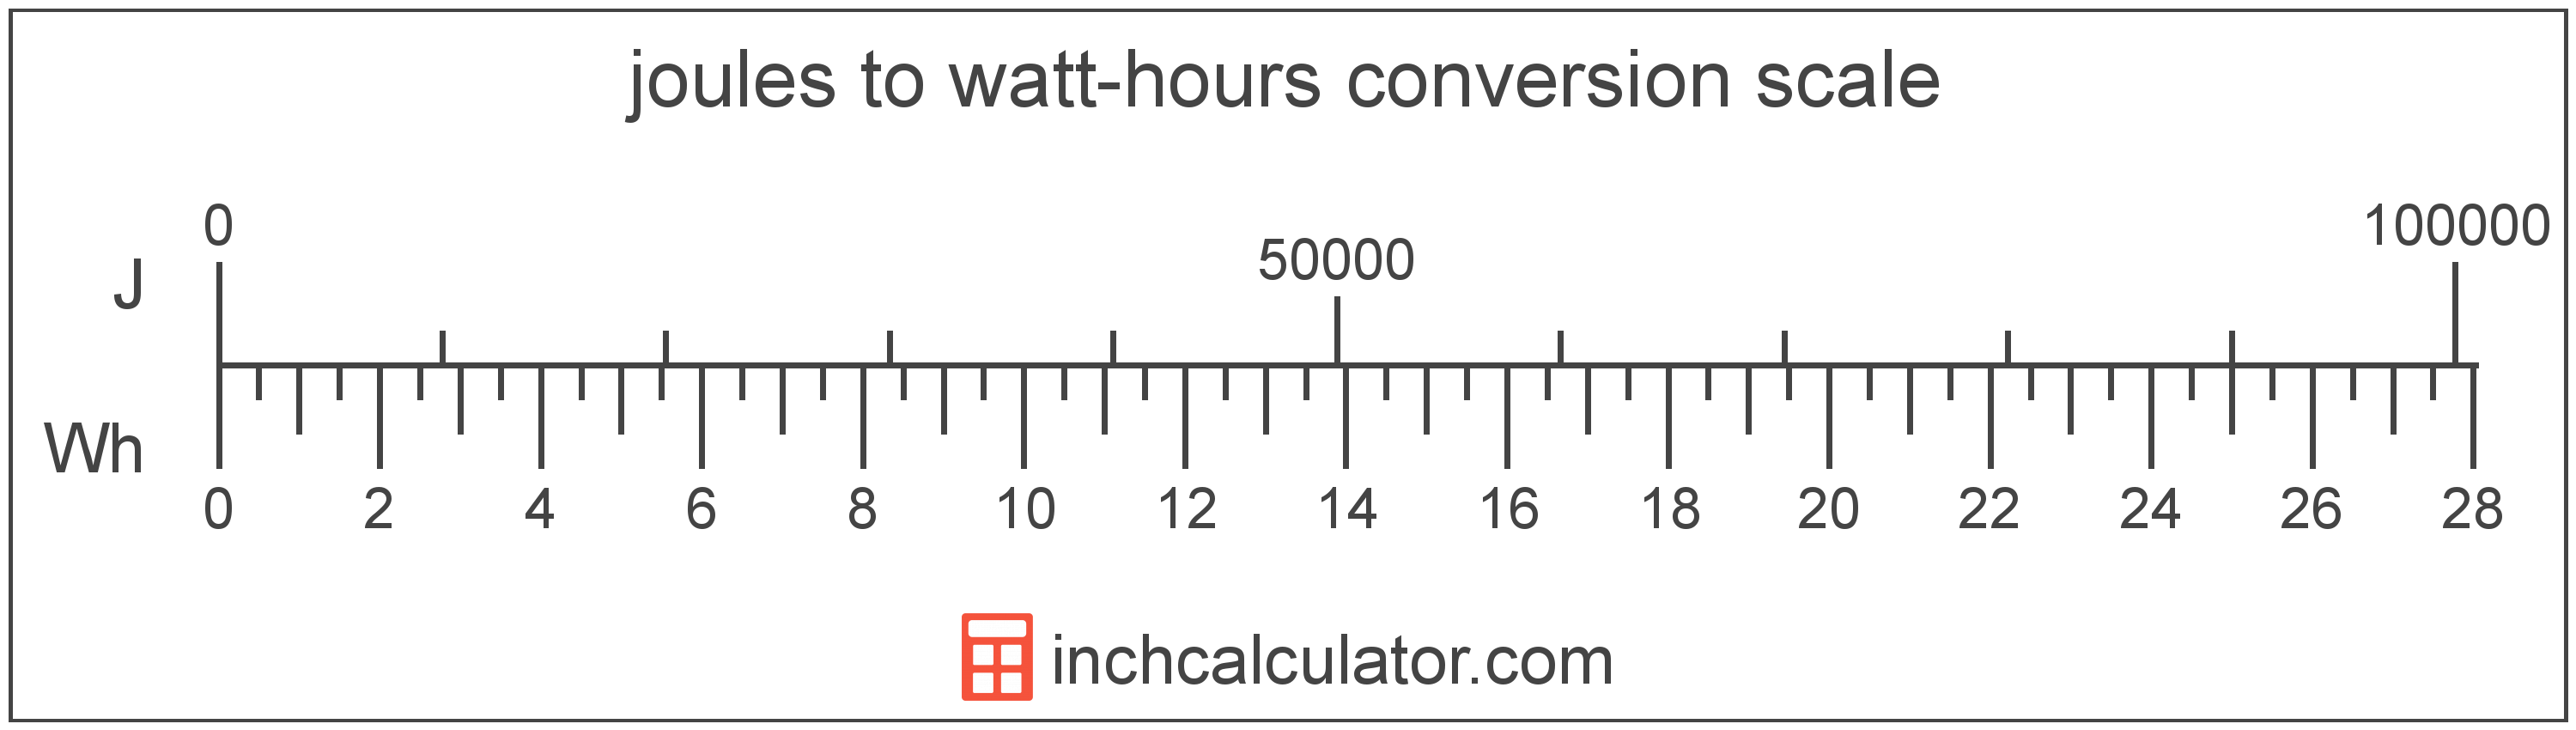 conversion scale showing joules and equivalent watt-hours energy values